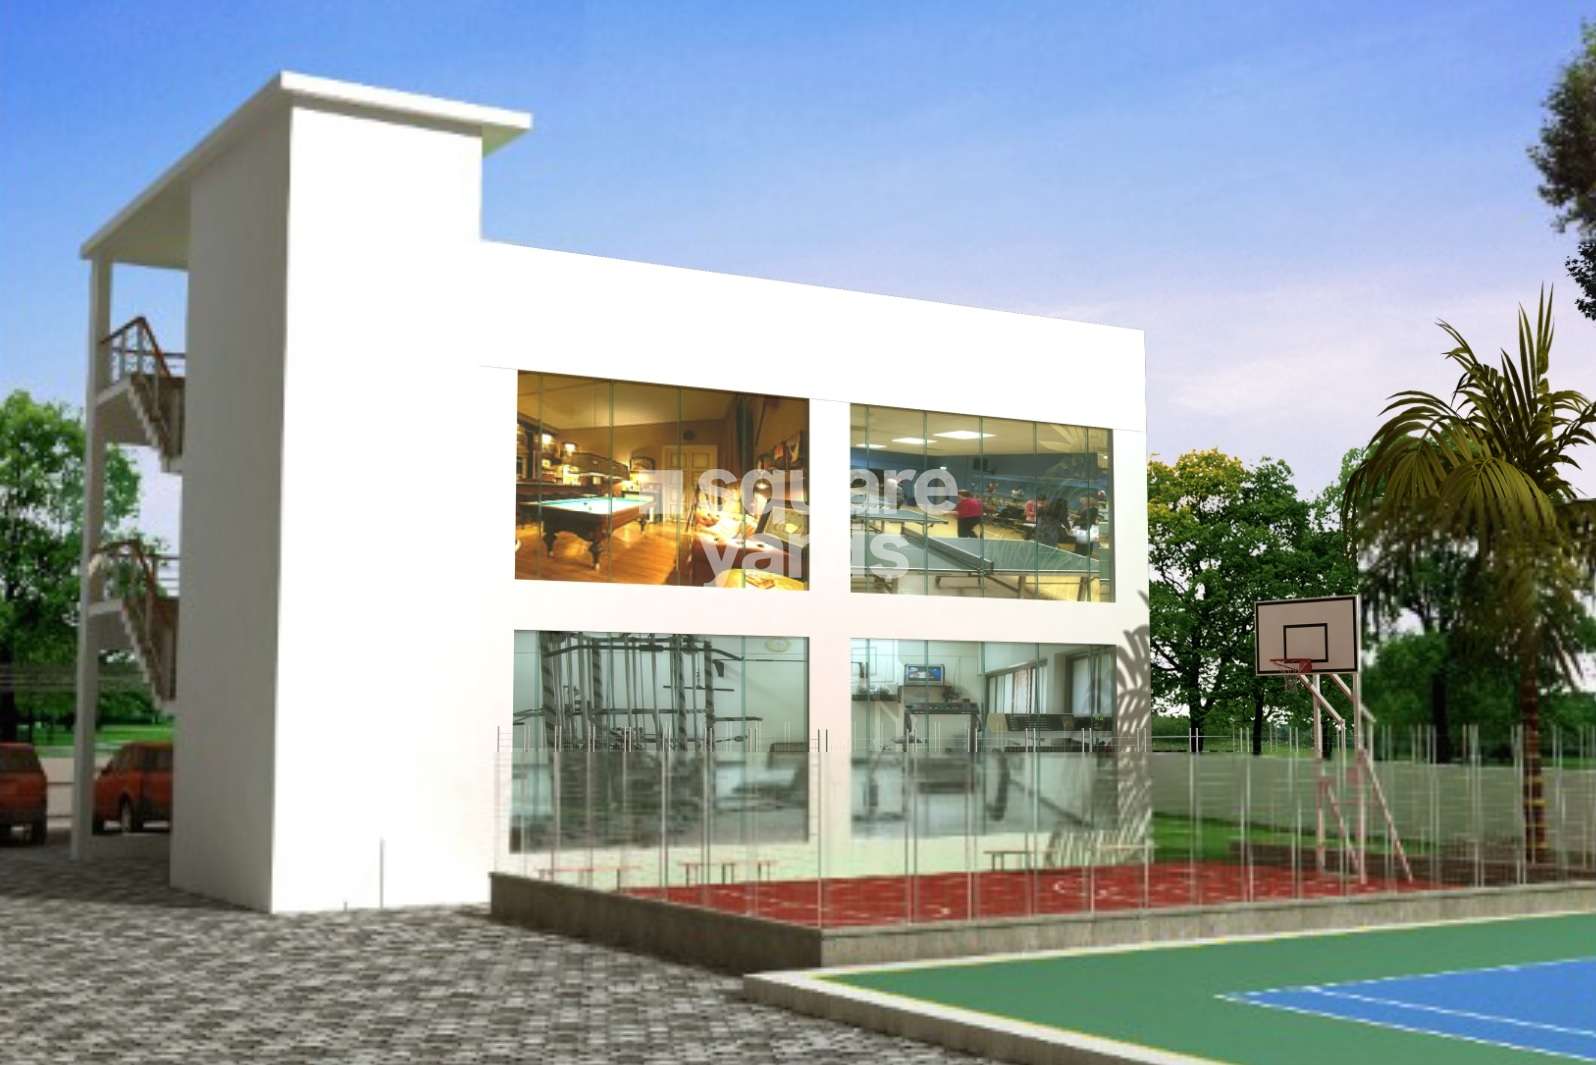 celebrity square amenities features4